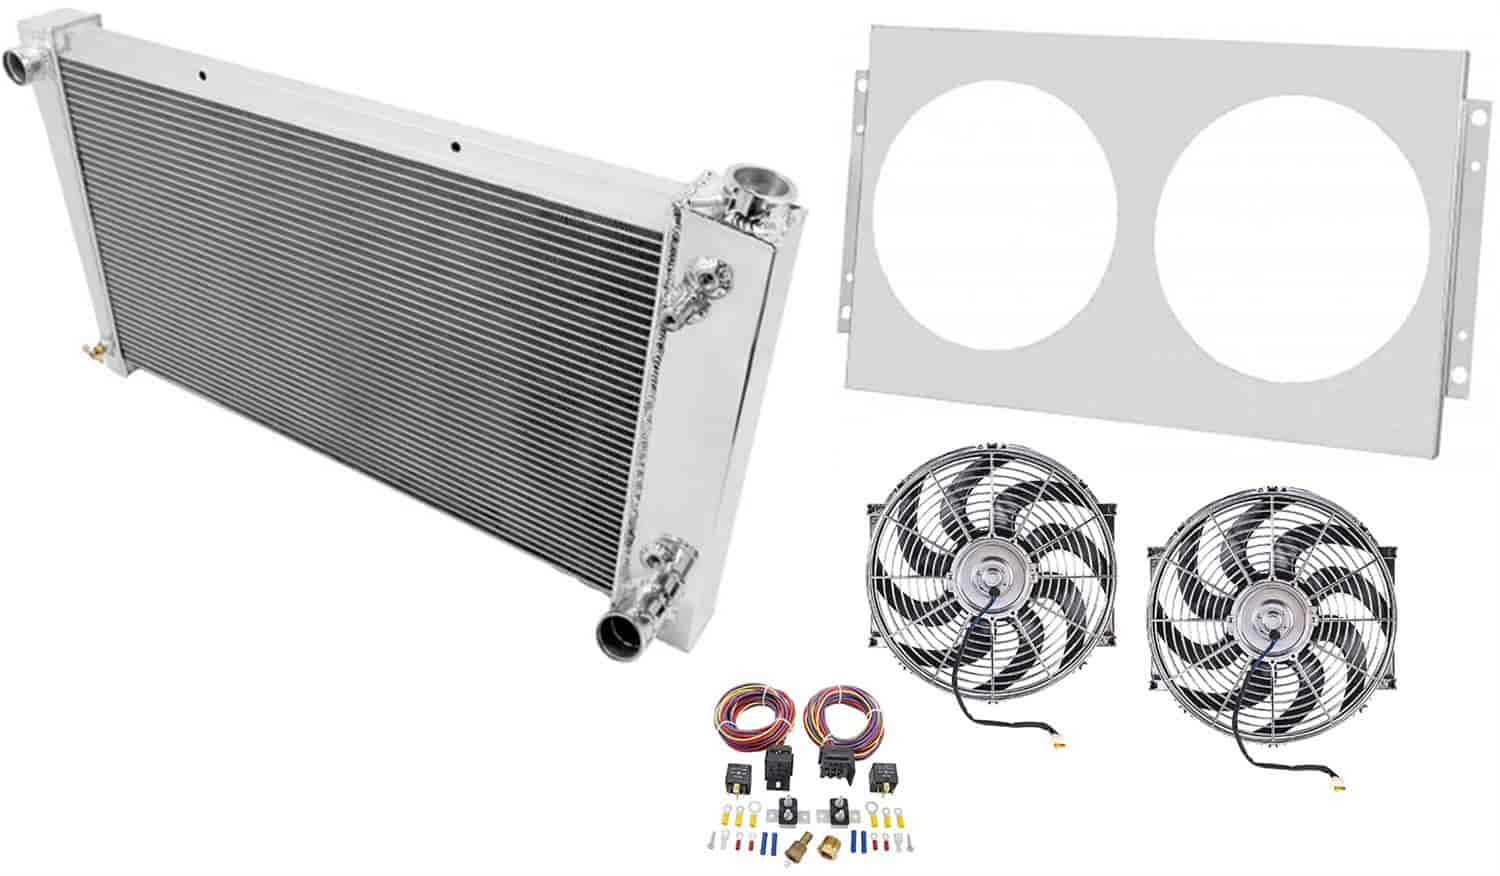 Radiator, Shroud and Fan Control Kit for 1967-1972 Chevrolet Truck (28 in. Core)